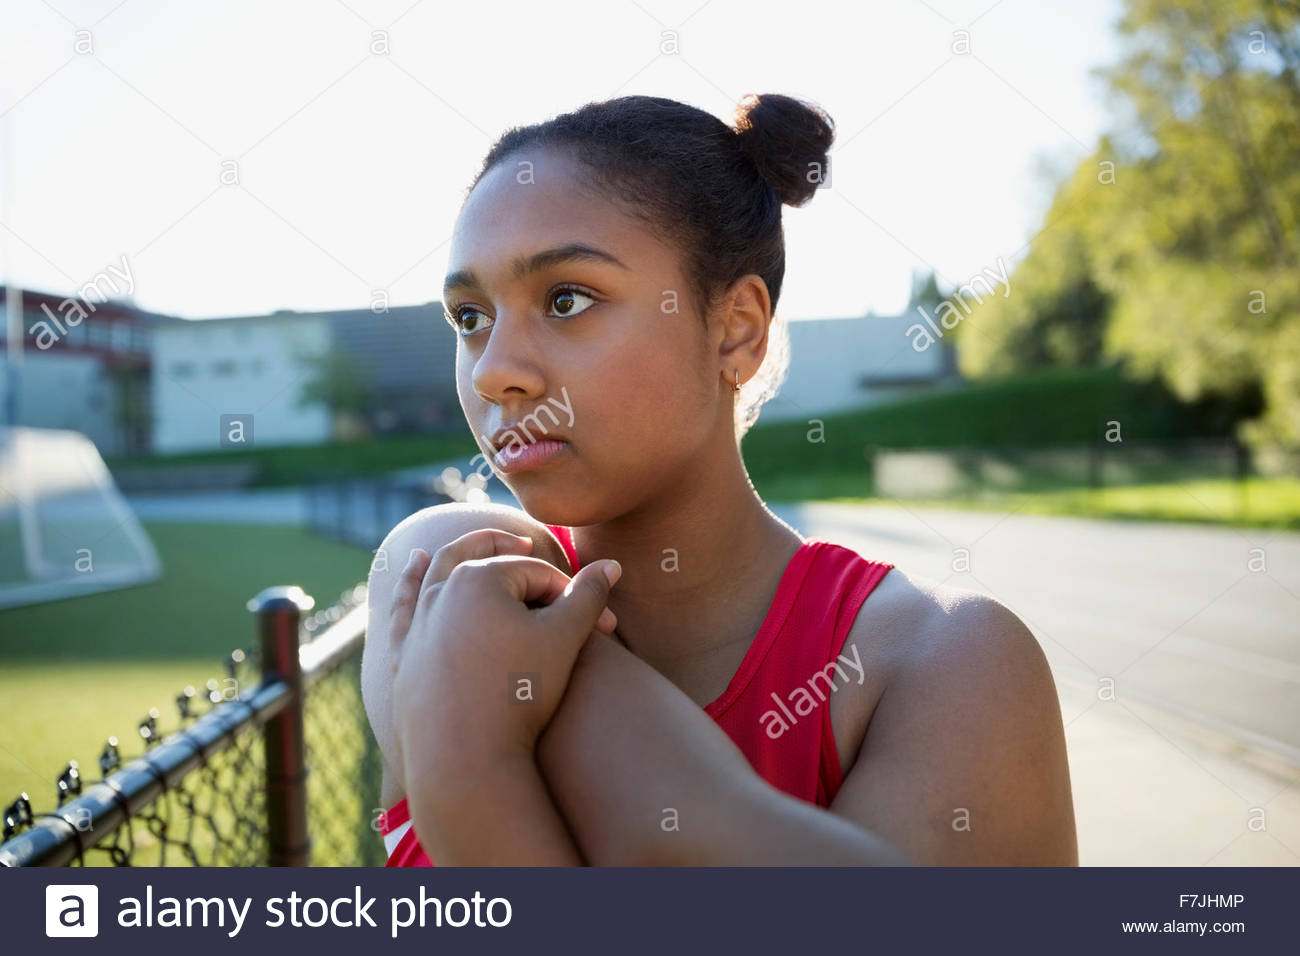 Determined high school athlete stretching arm running track Stock Photo